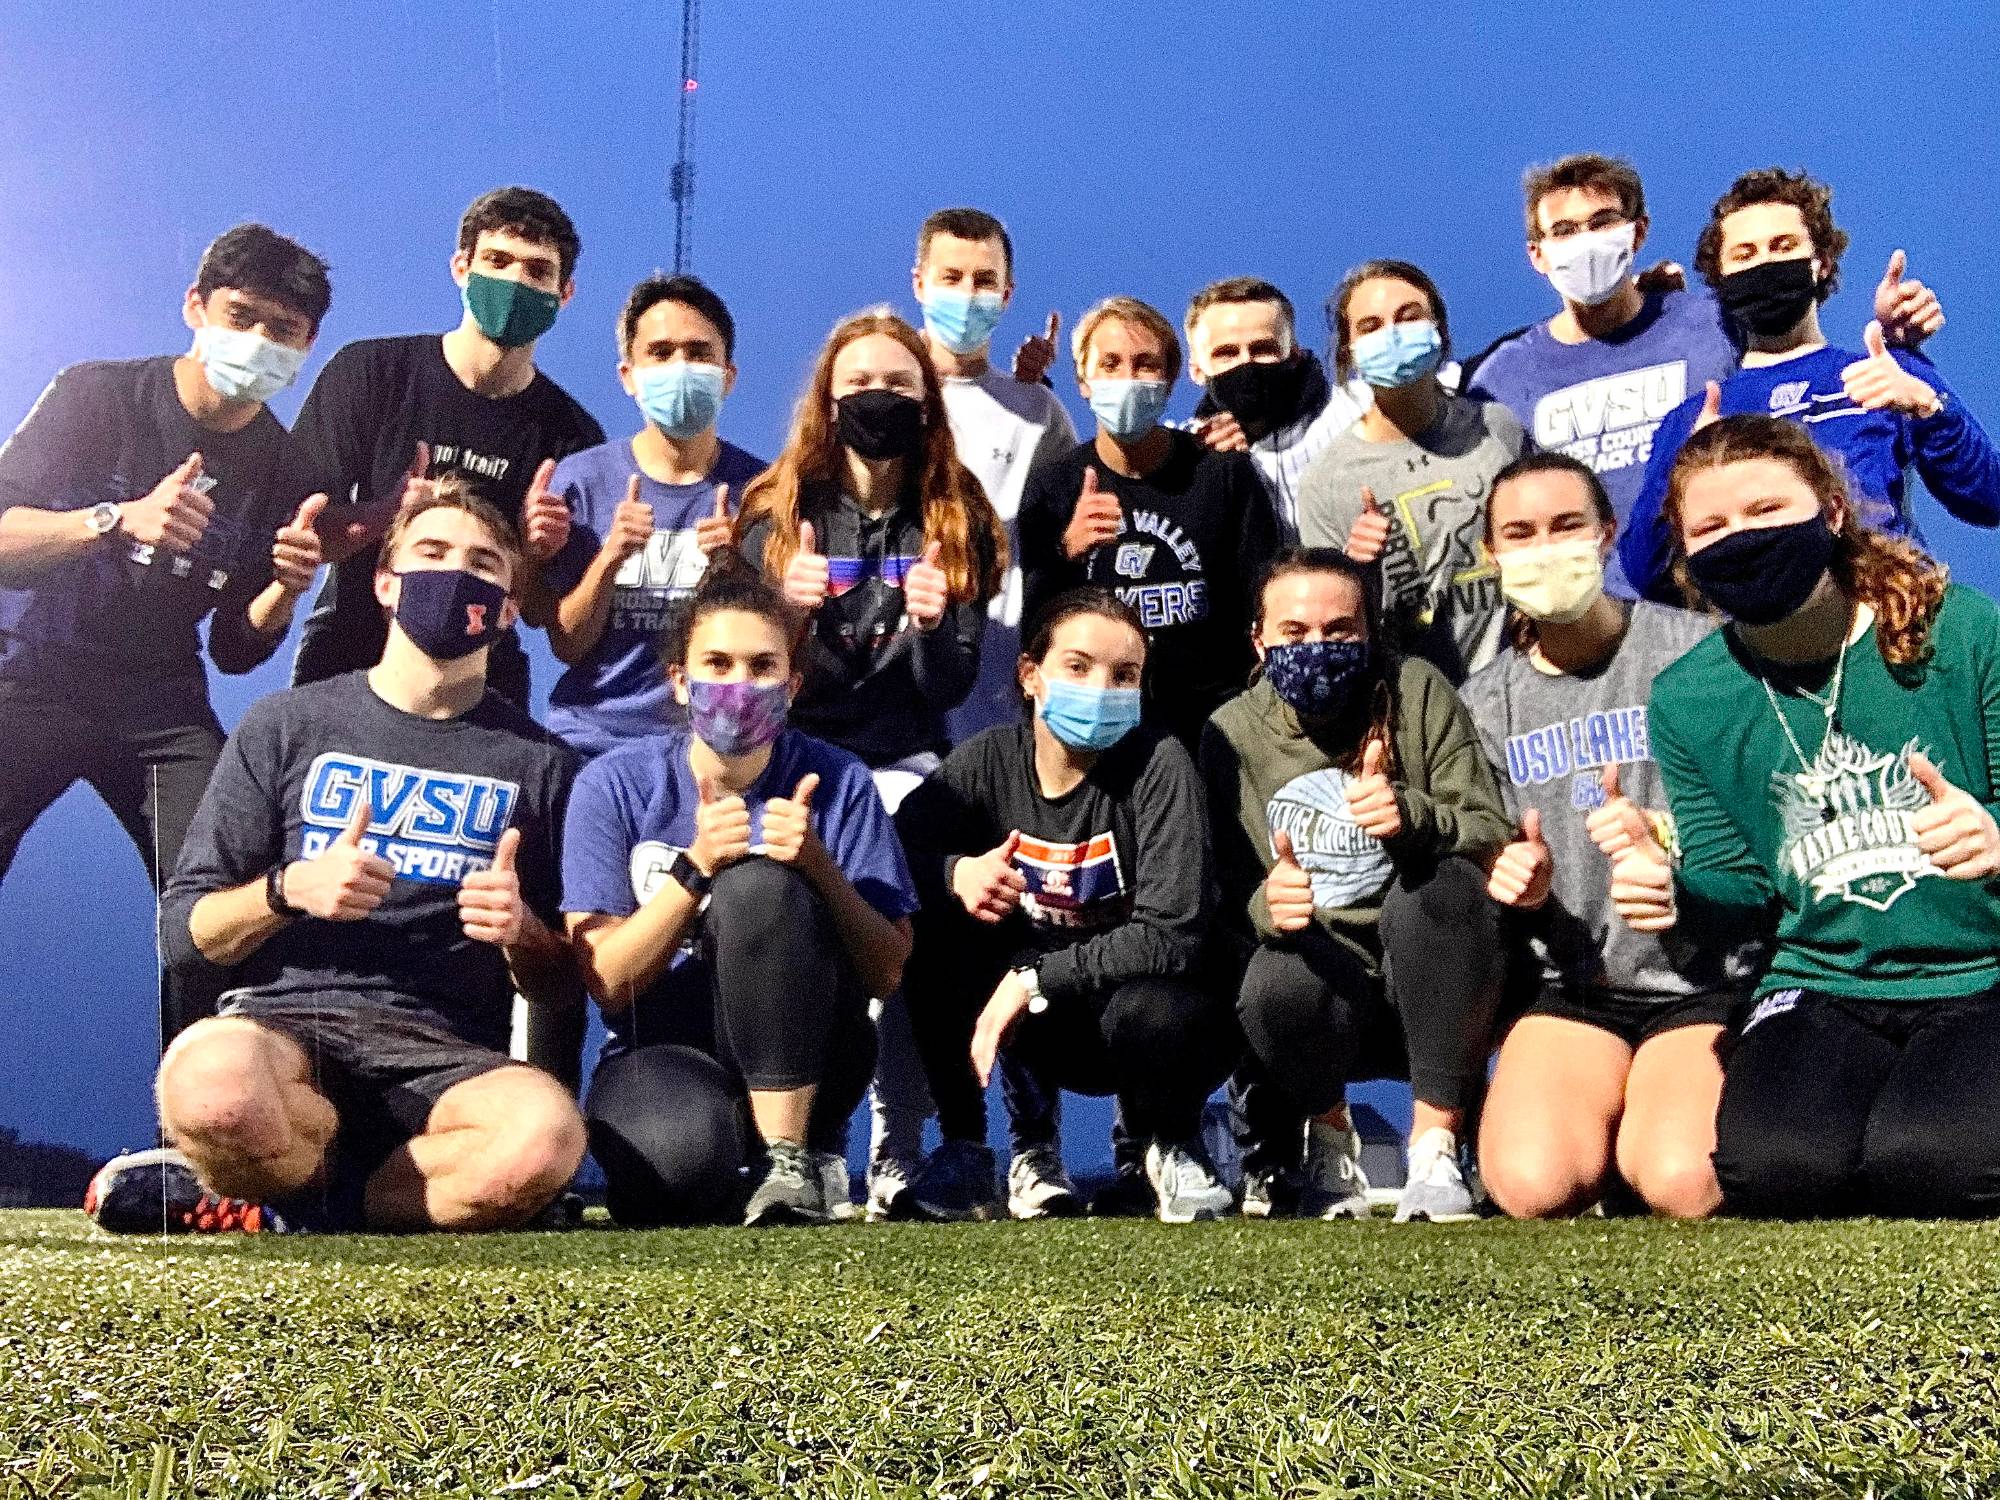 GVSU Cross Country and Track Club Host an Ultimate Frisbee Night for Club Members